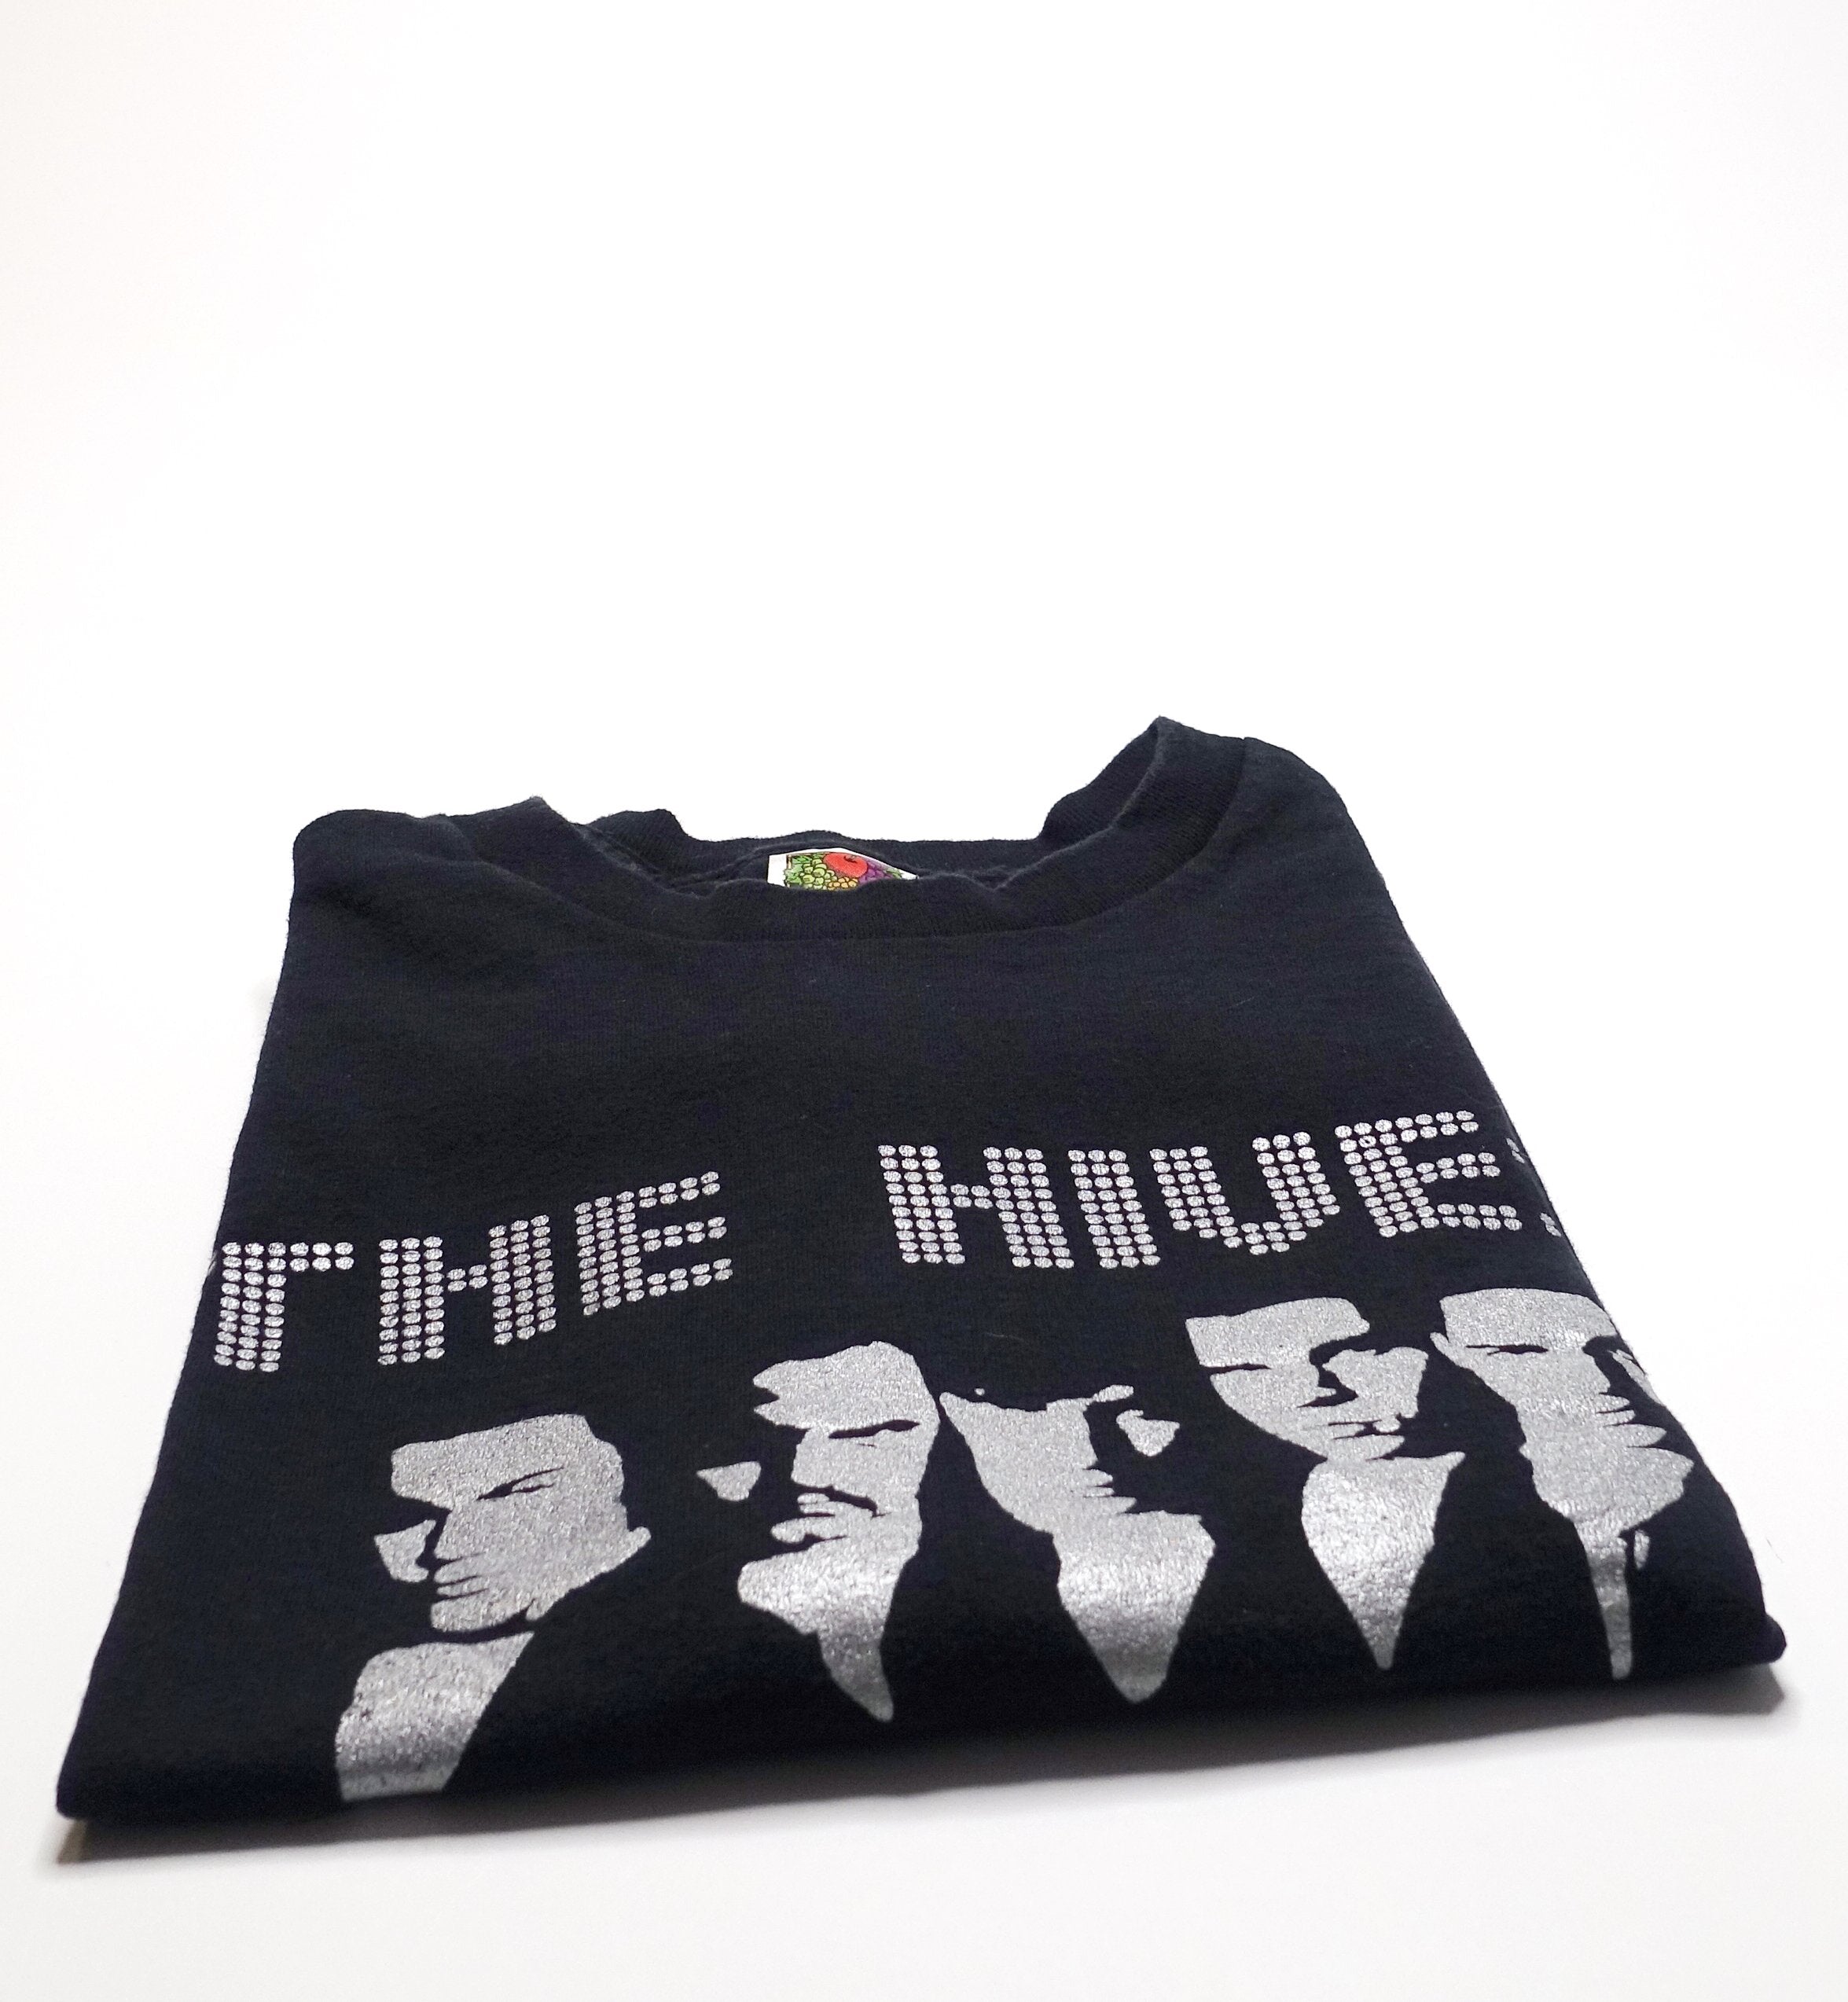 the Hives – Hate To Say I Told You So 2000 Tour Shirt Size XL